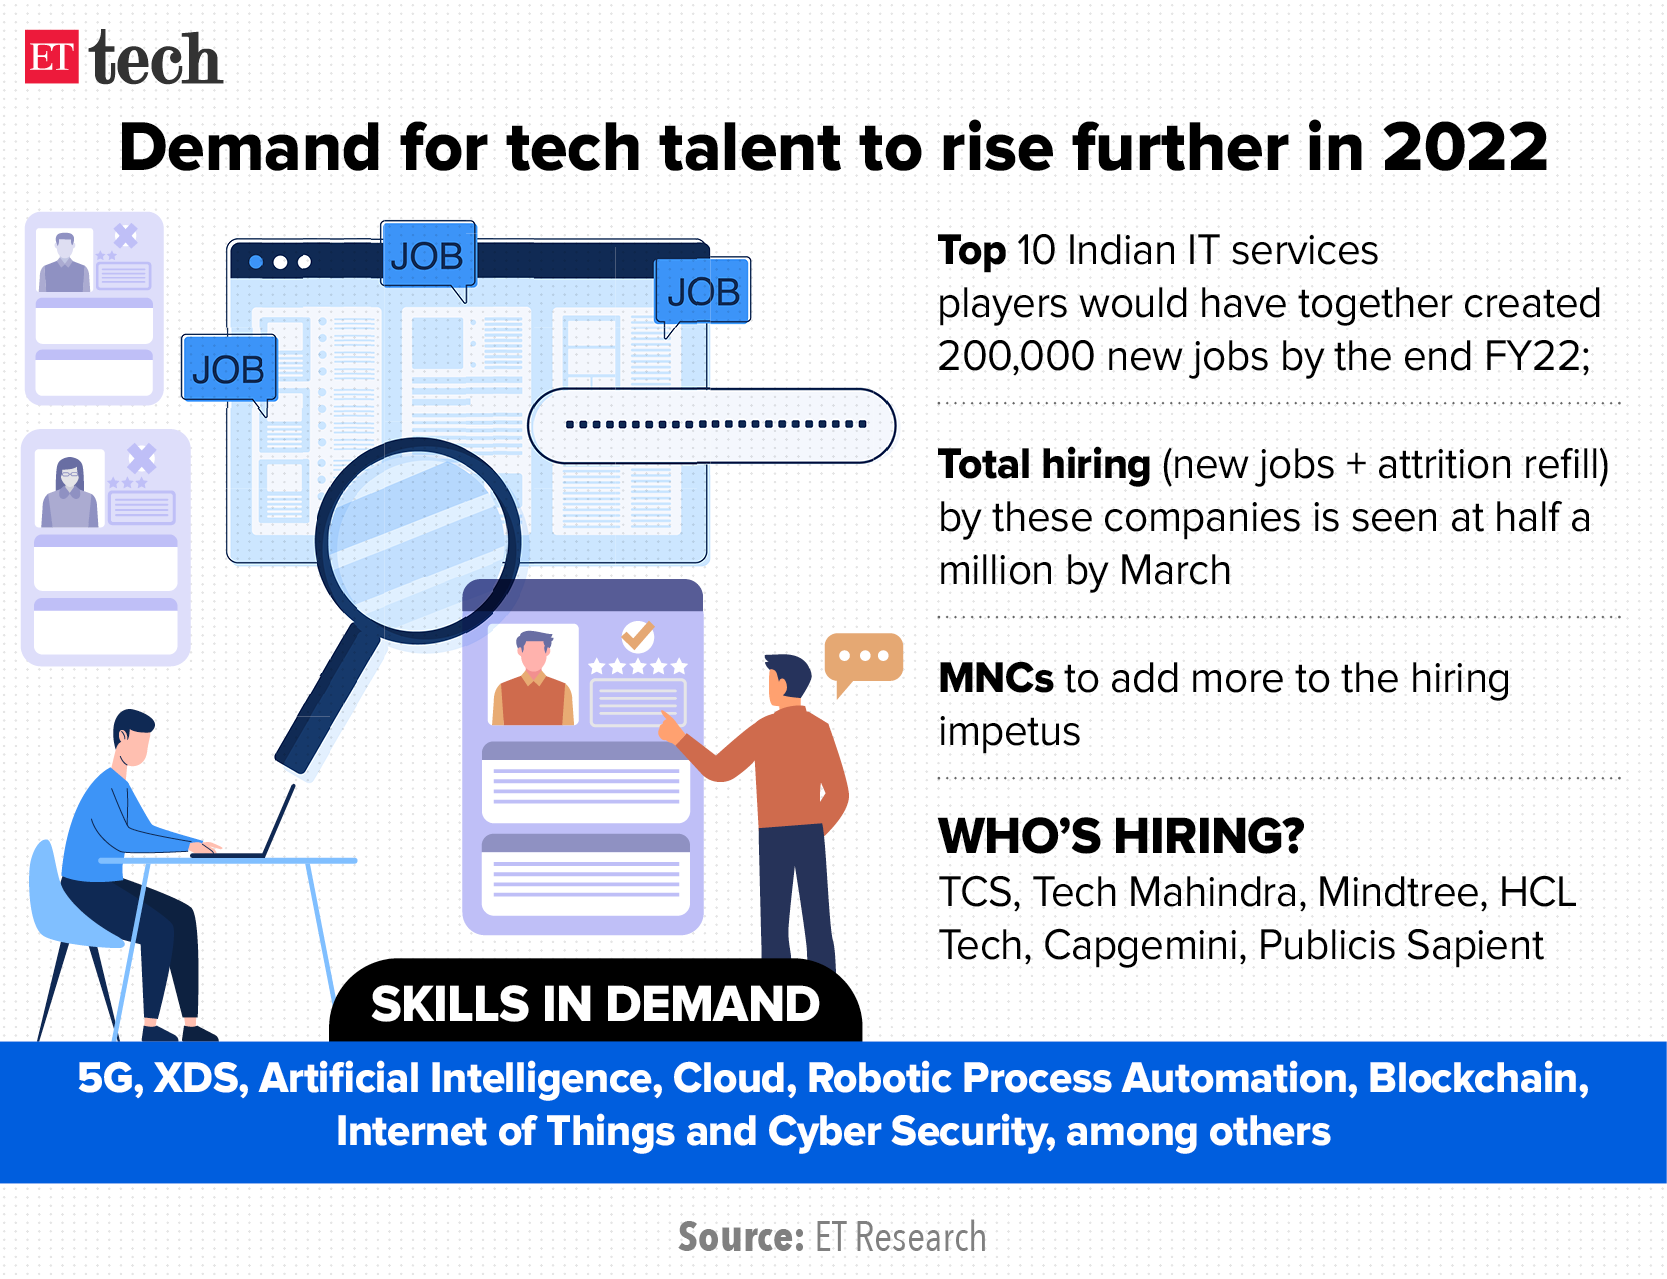 Demand for tech talent to rise further in 2022